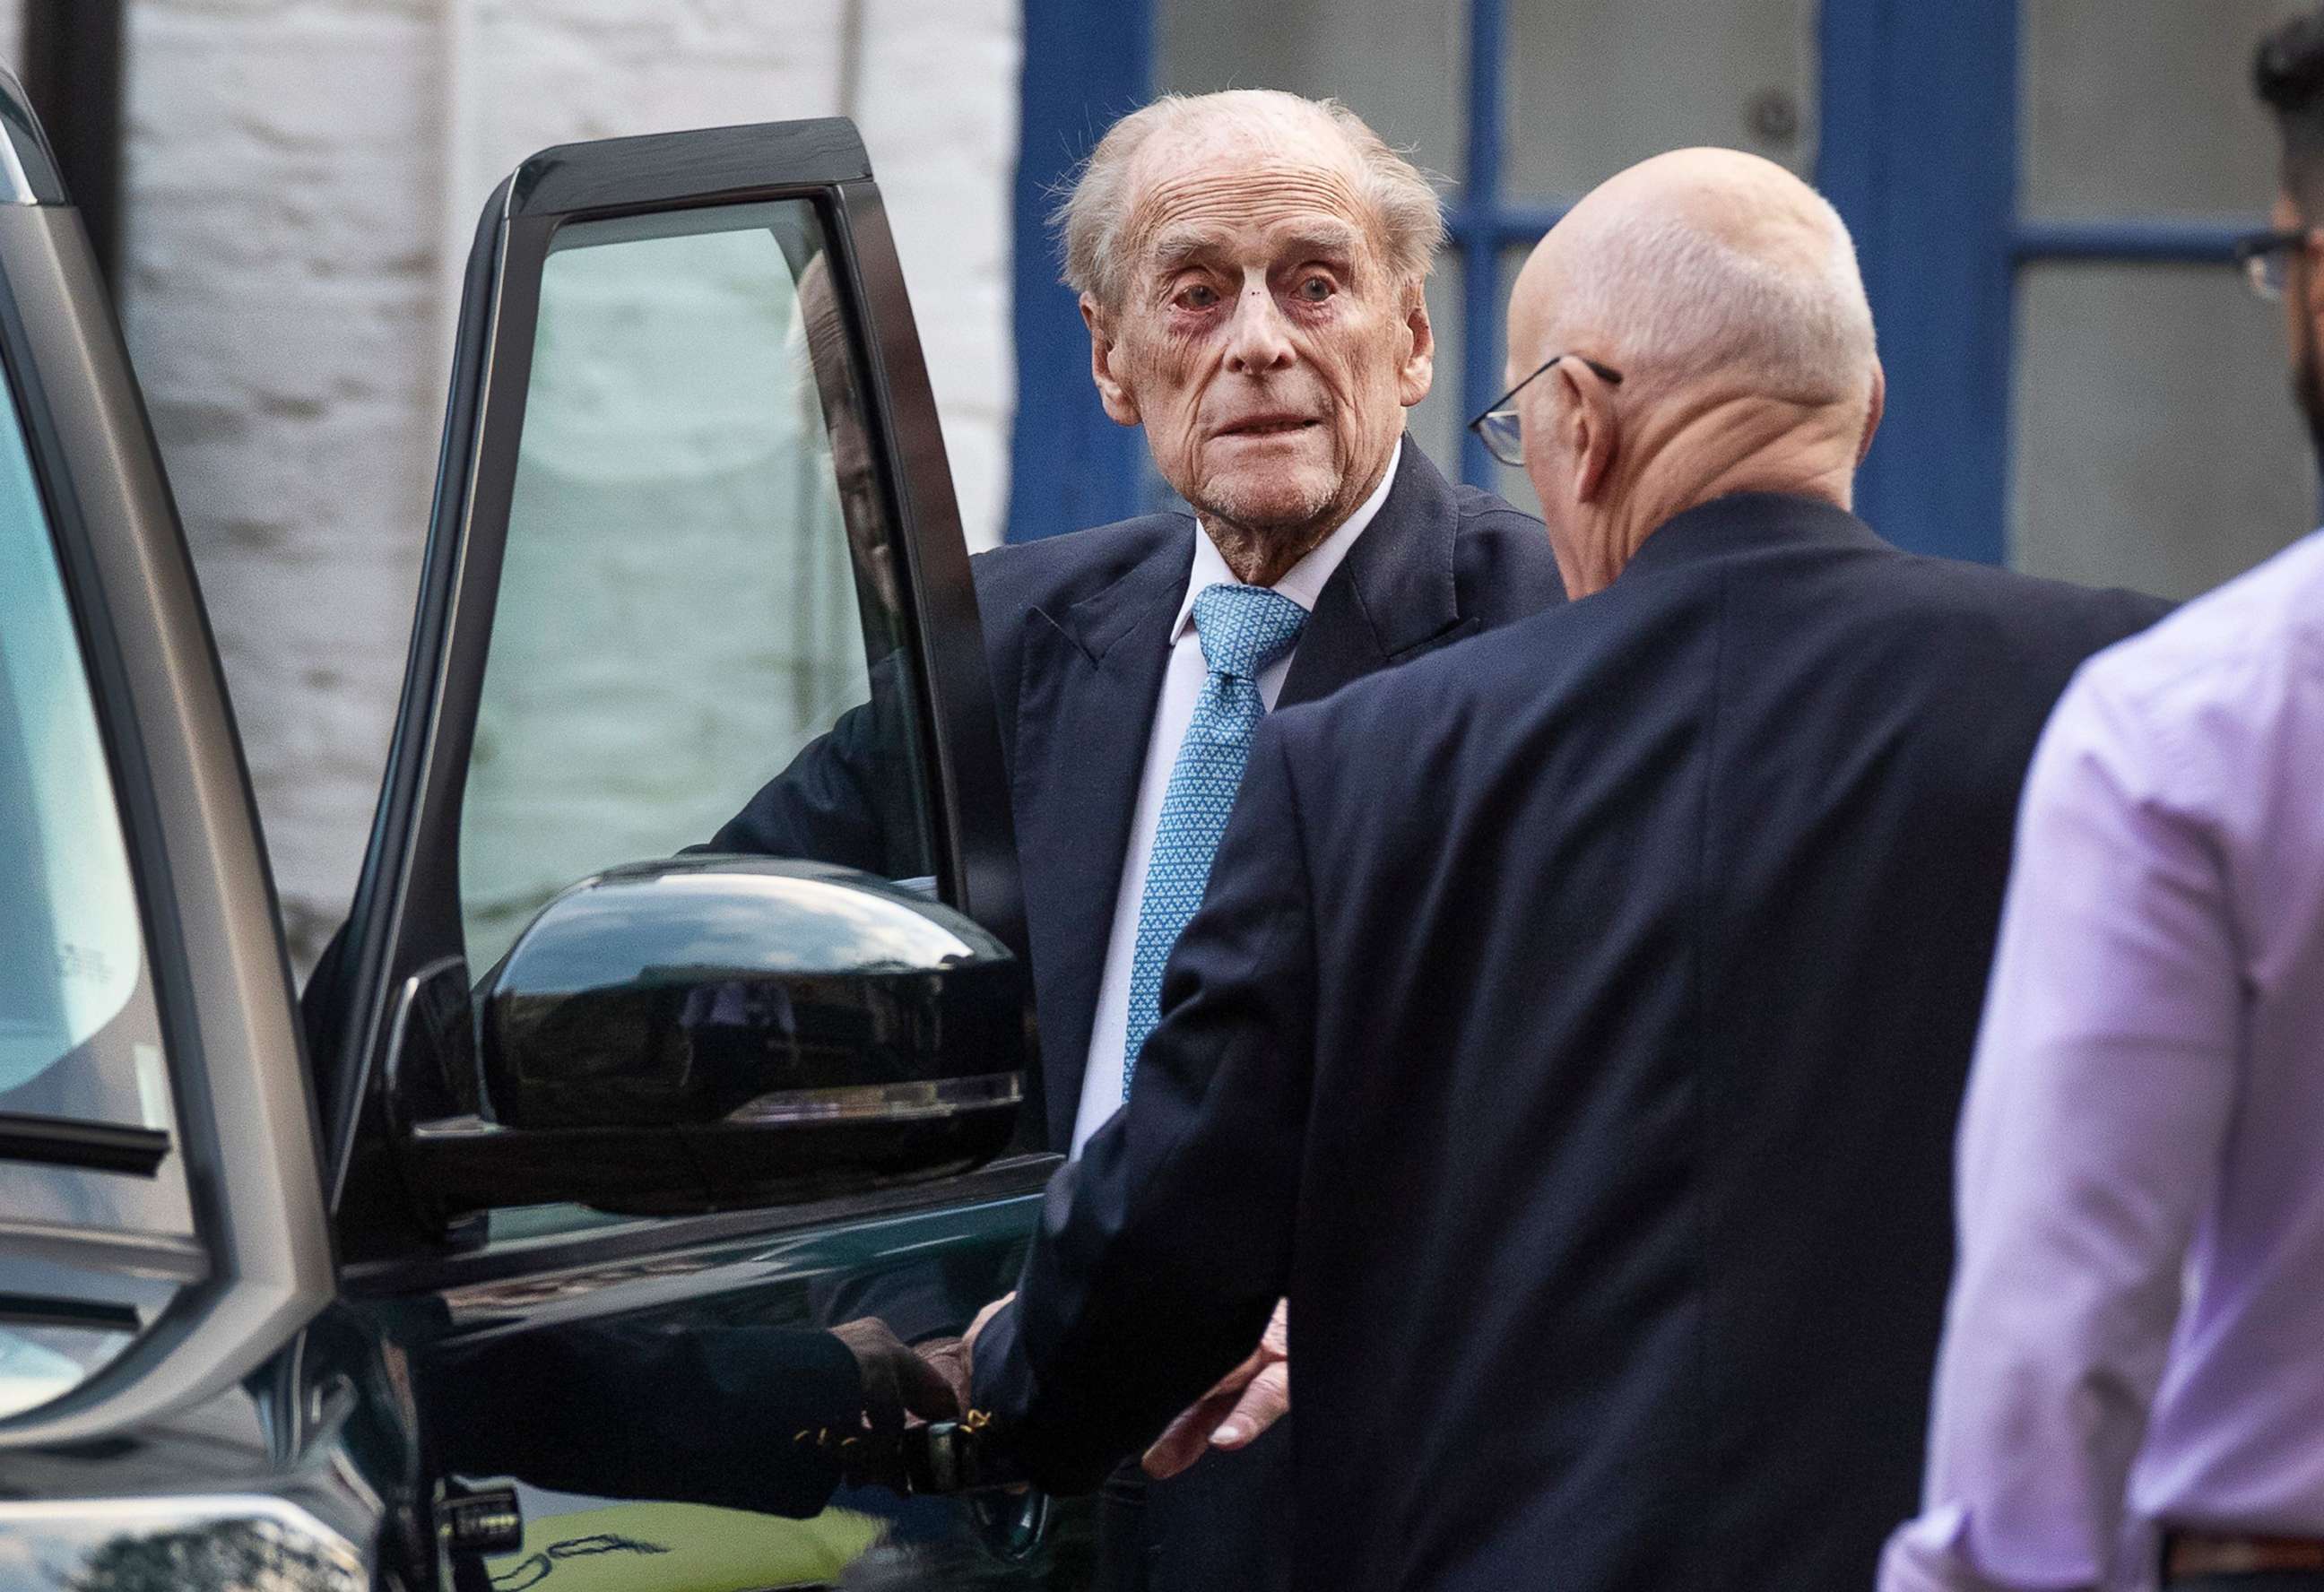 PHOTO: Prince Philip is  seen leaving King Edward VII hospital in London, Dec. 24, 2019.
